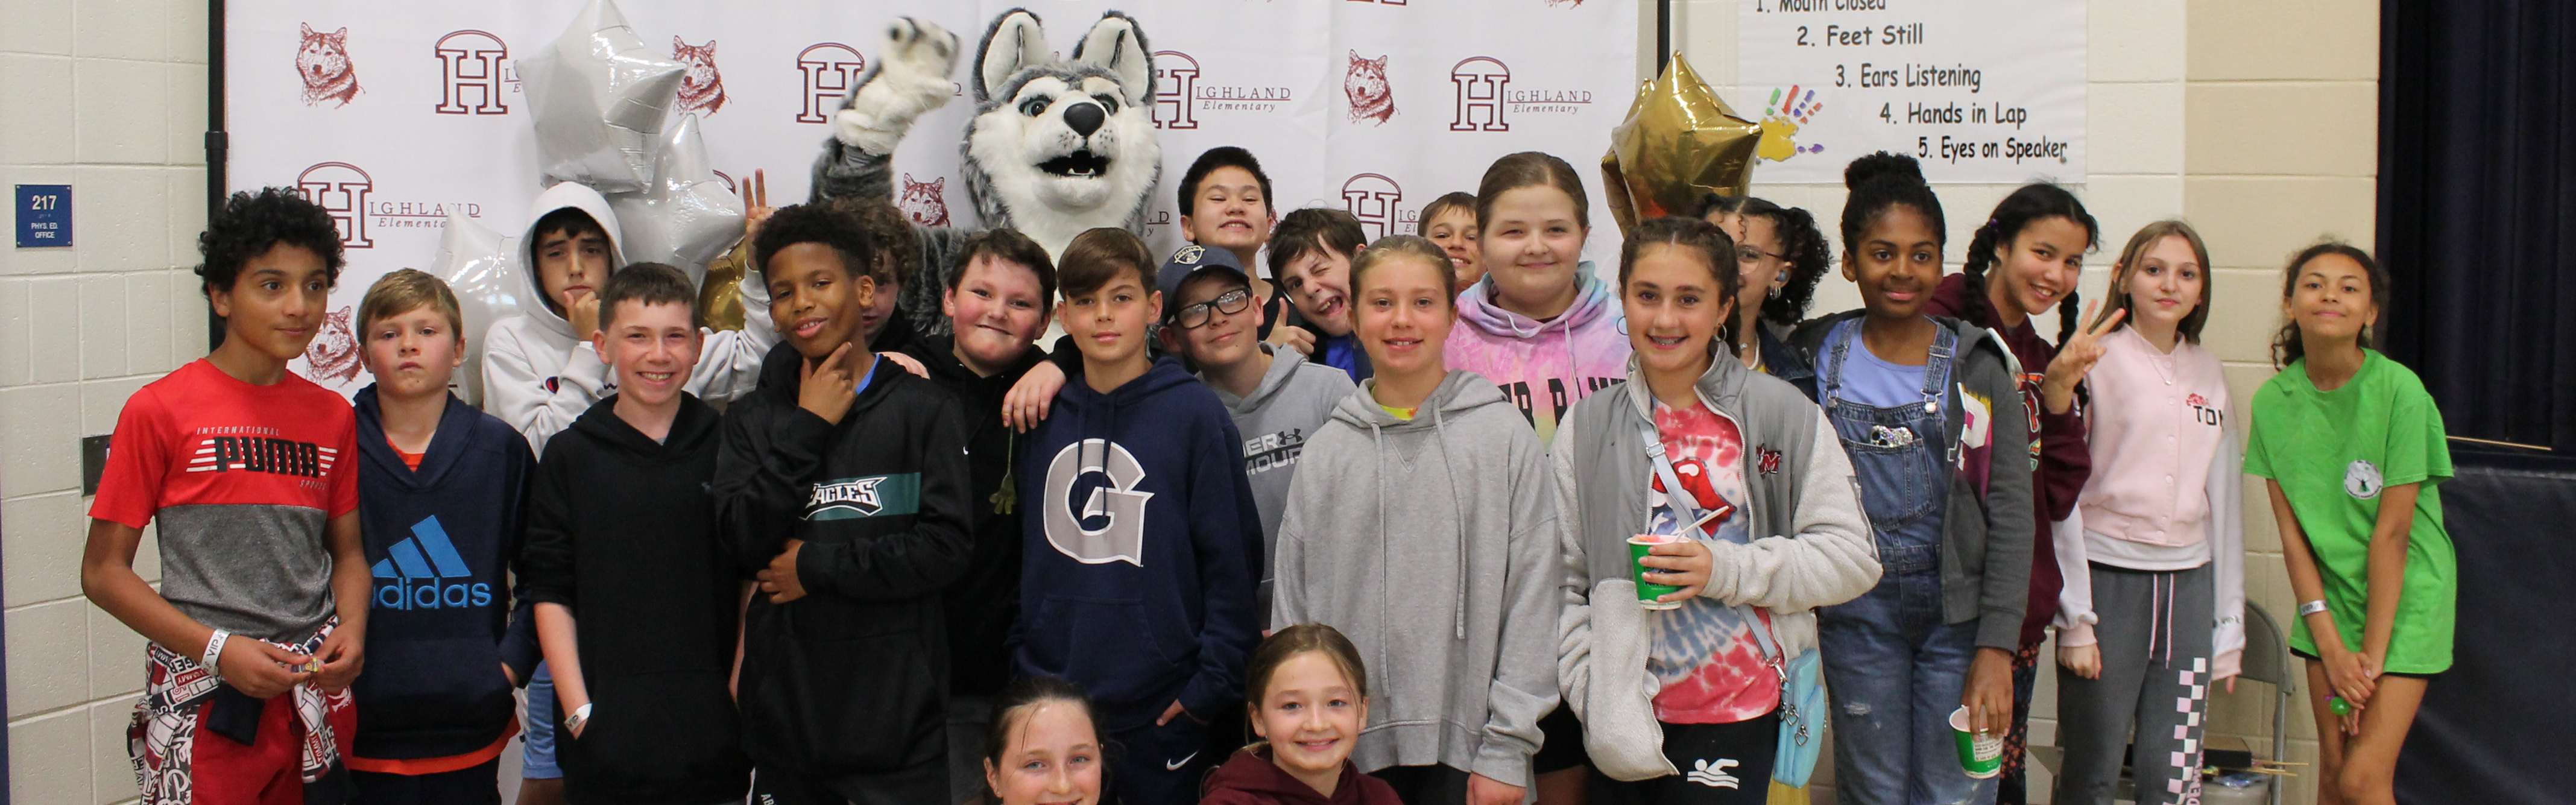 Highland Elementary students posing with the Husky mascot